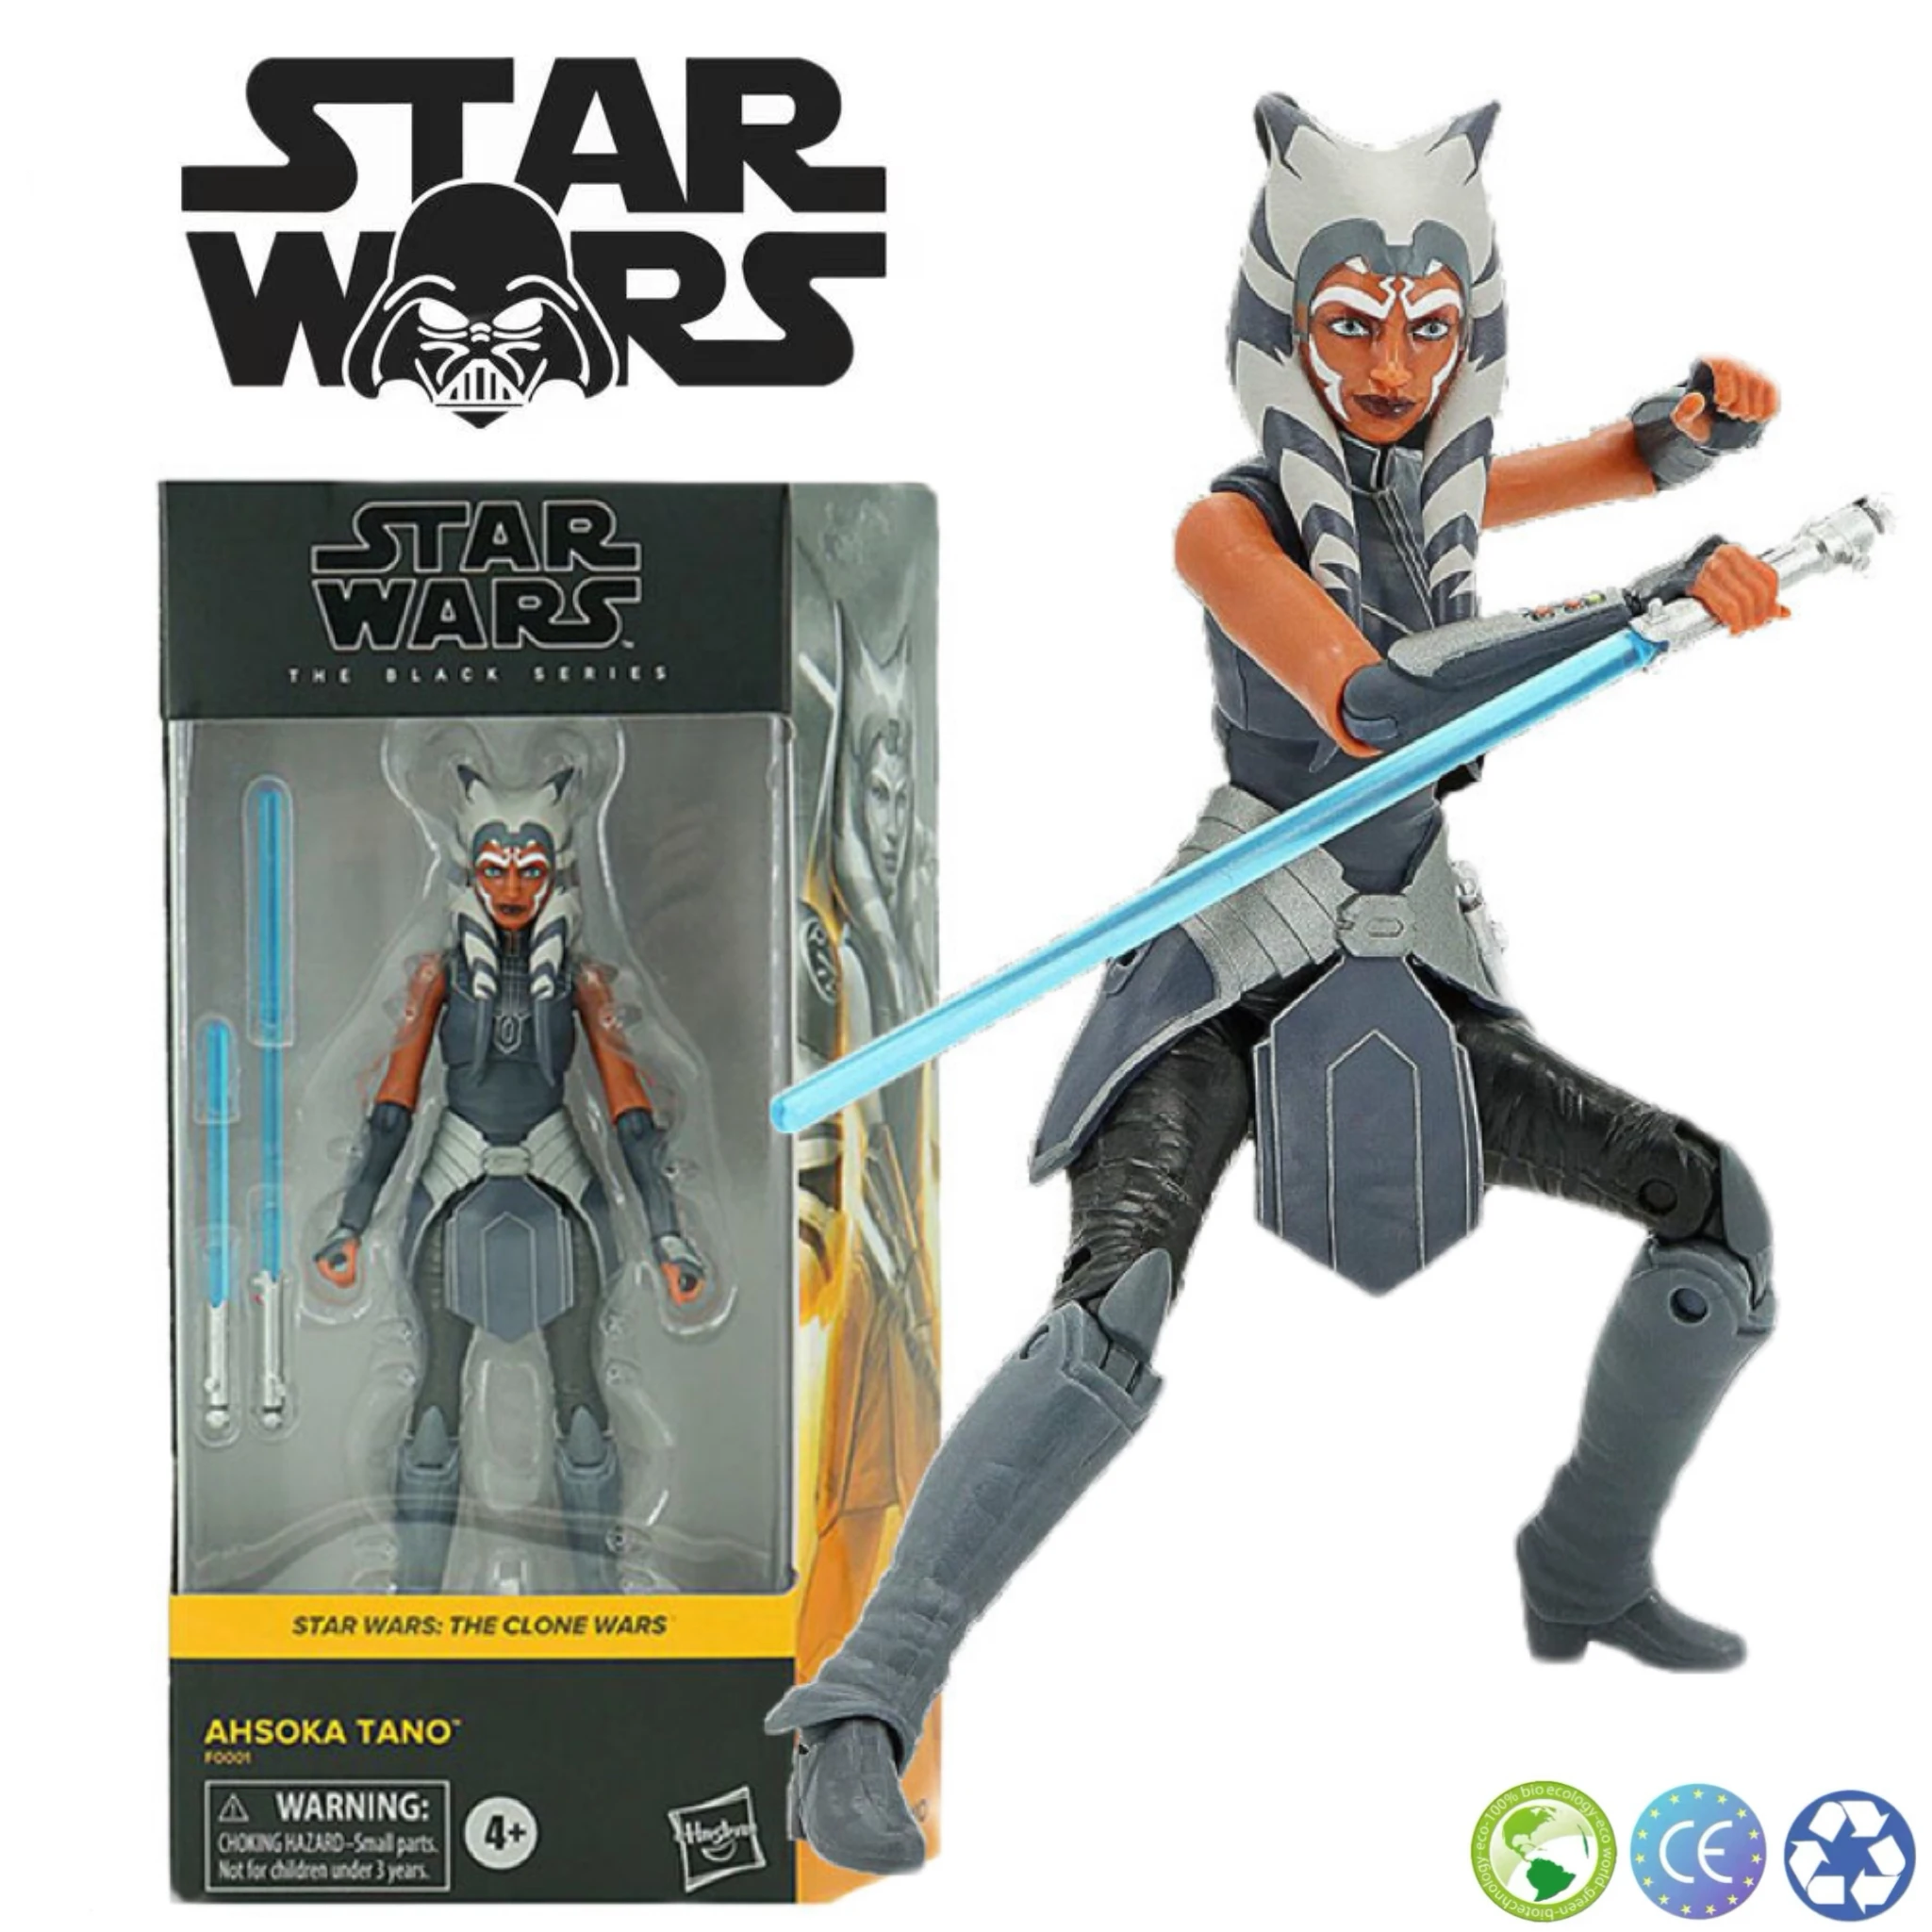 

Ahsoka Tano Star Wars Action Figures Toys 6 Inch Movable Statue Model With Blue Lightsaber Collectible Ornaments Toys Gifts